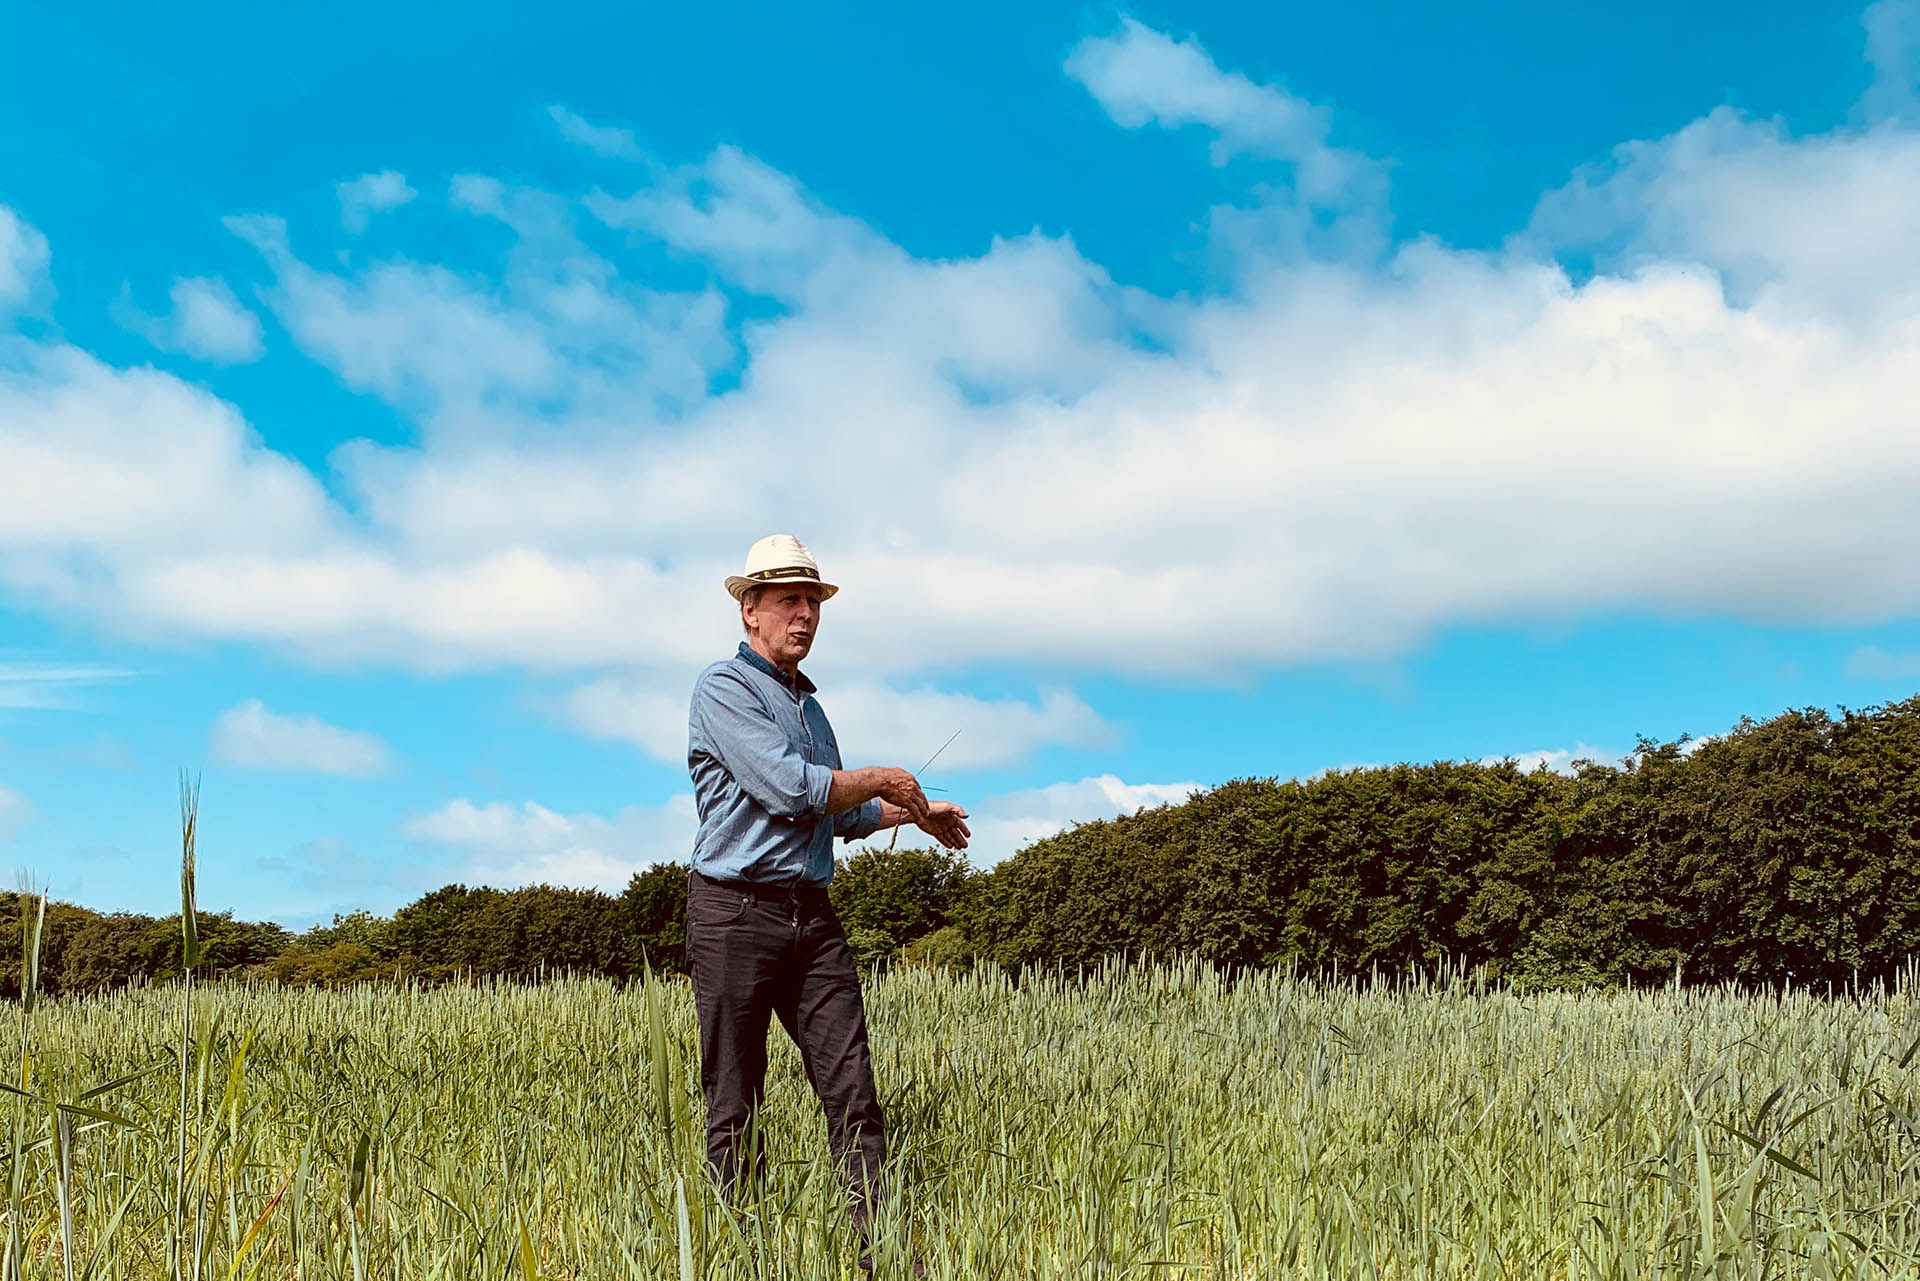 Anders Borgen breeds for biodiversity. Here he is standing on the grain fields in Mariager, Jutland Denmark.